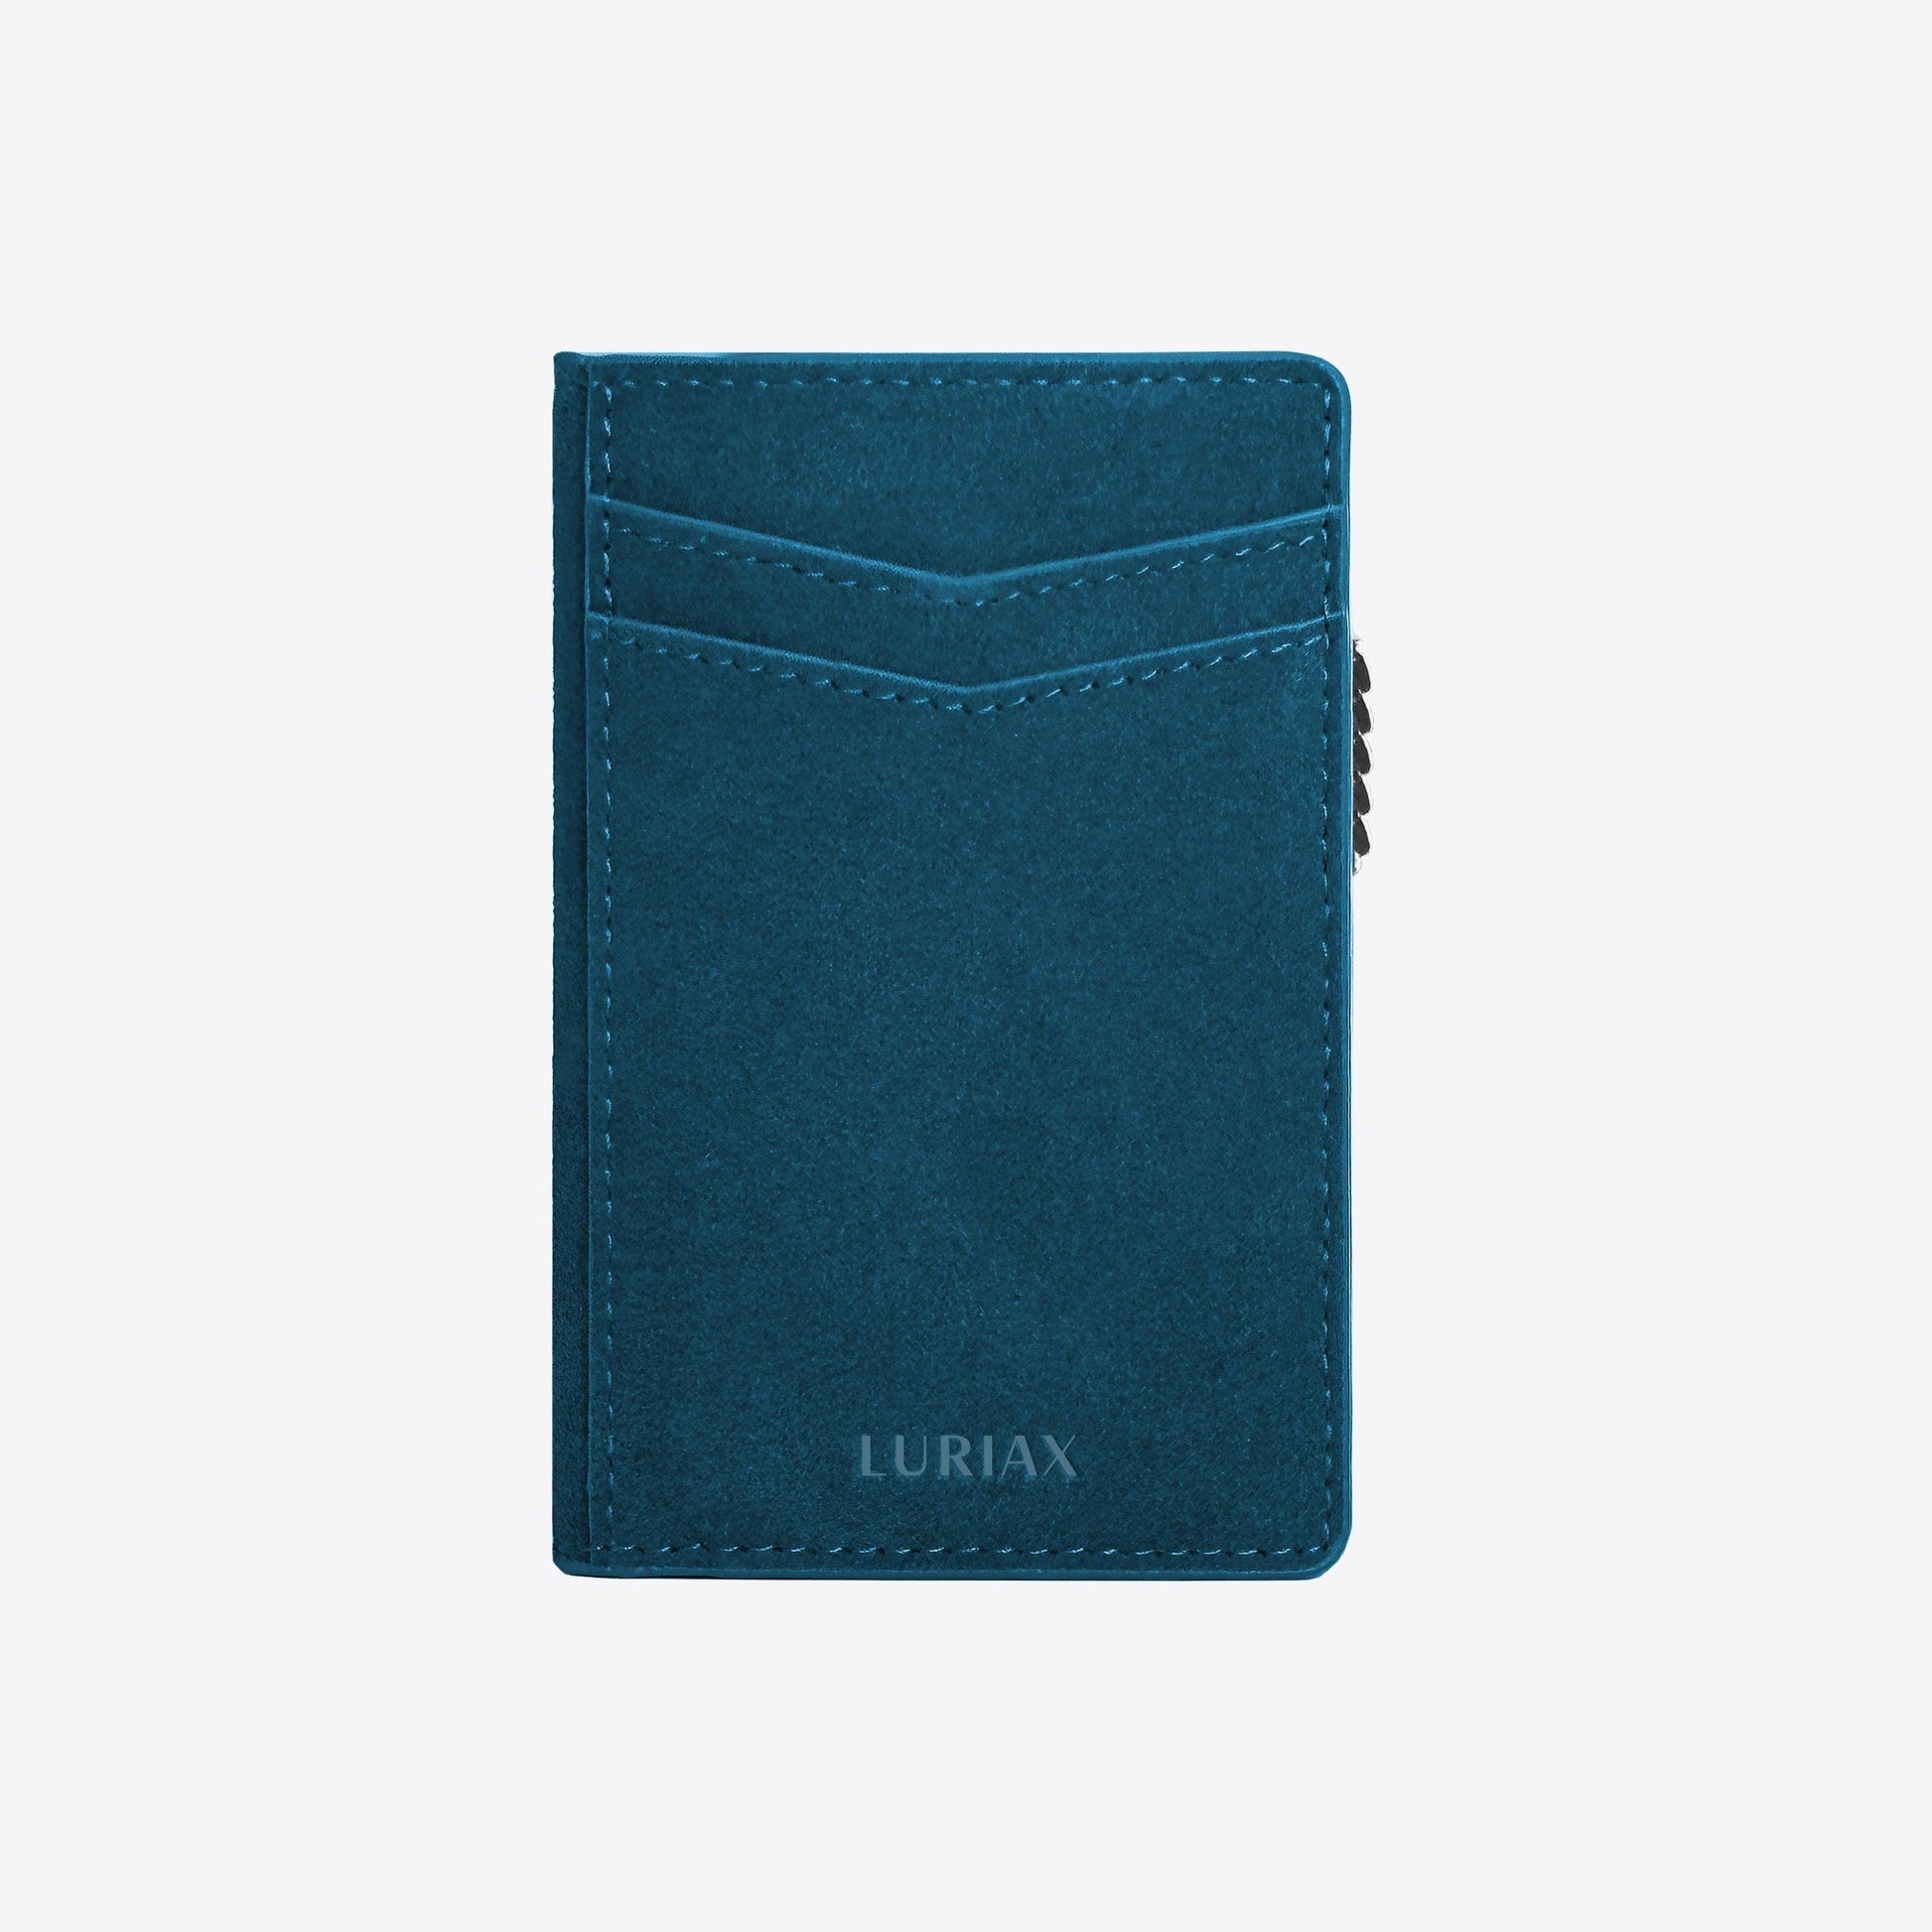 Alcantara Suede Leather iPhone Case and Accessories Collection - The Bifold Cardholder - Prussian Blue - Luriax